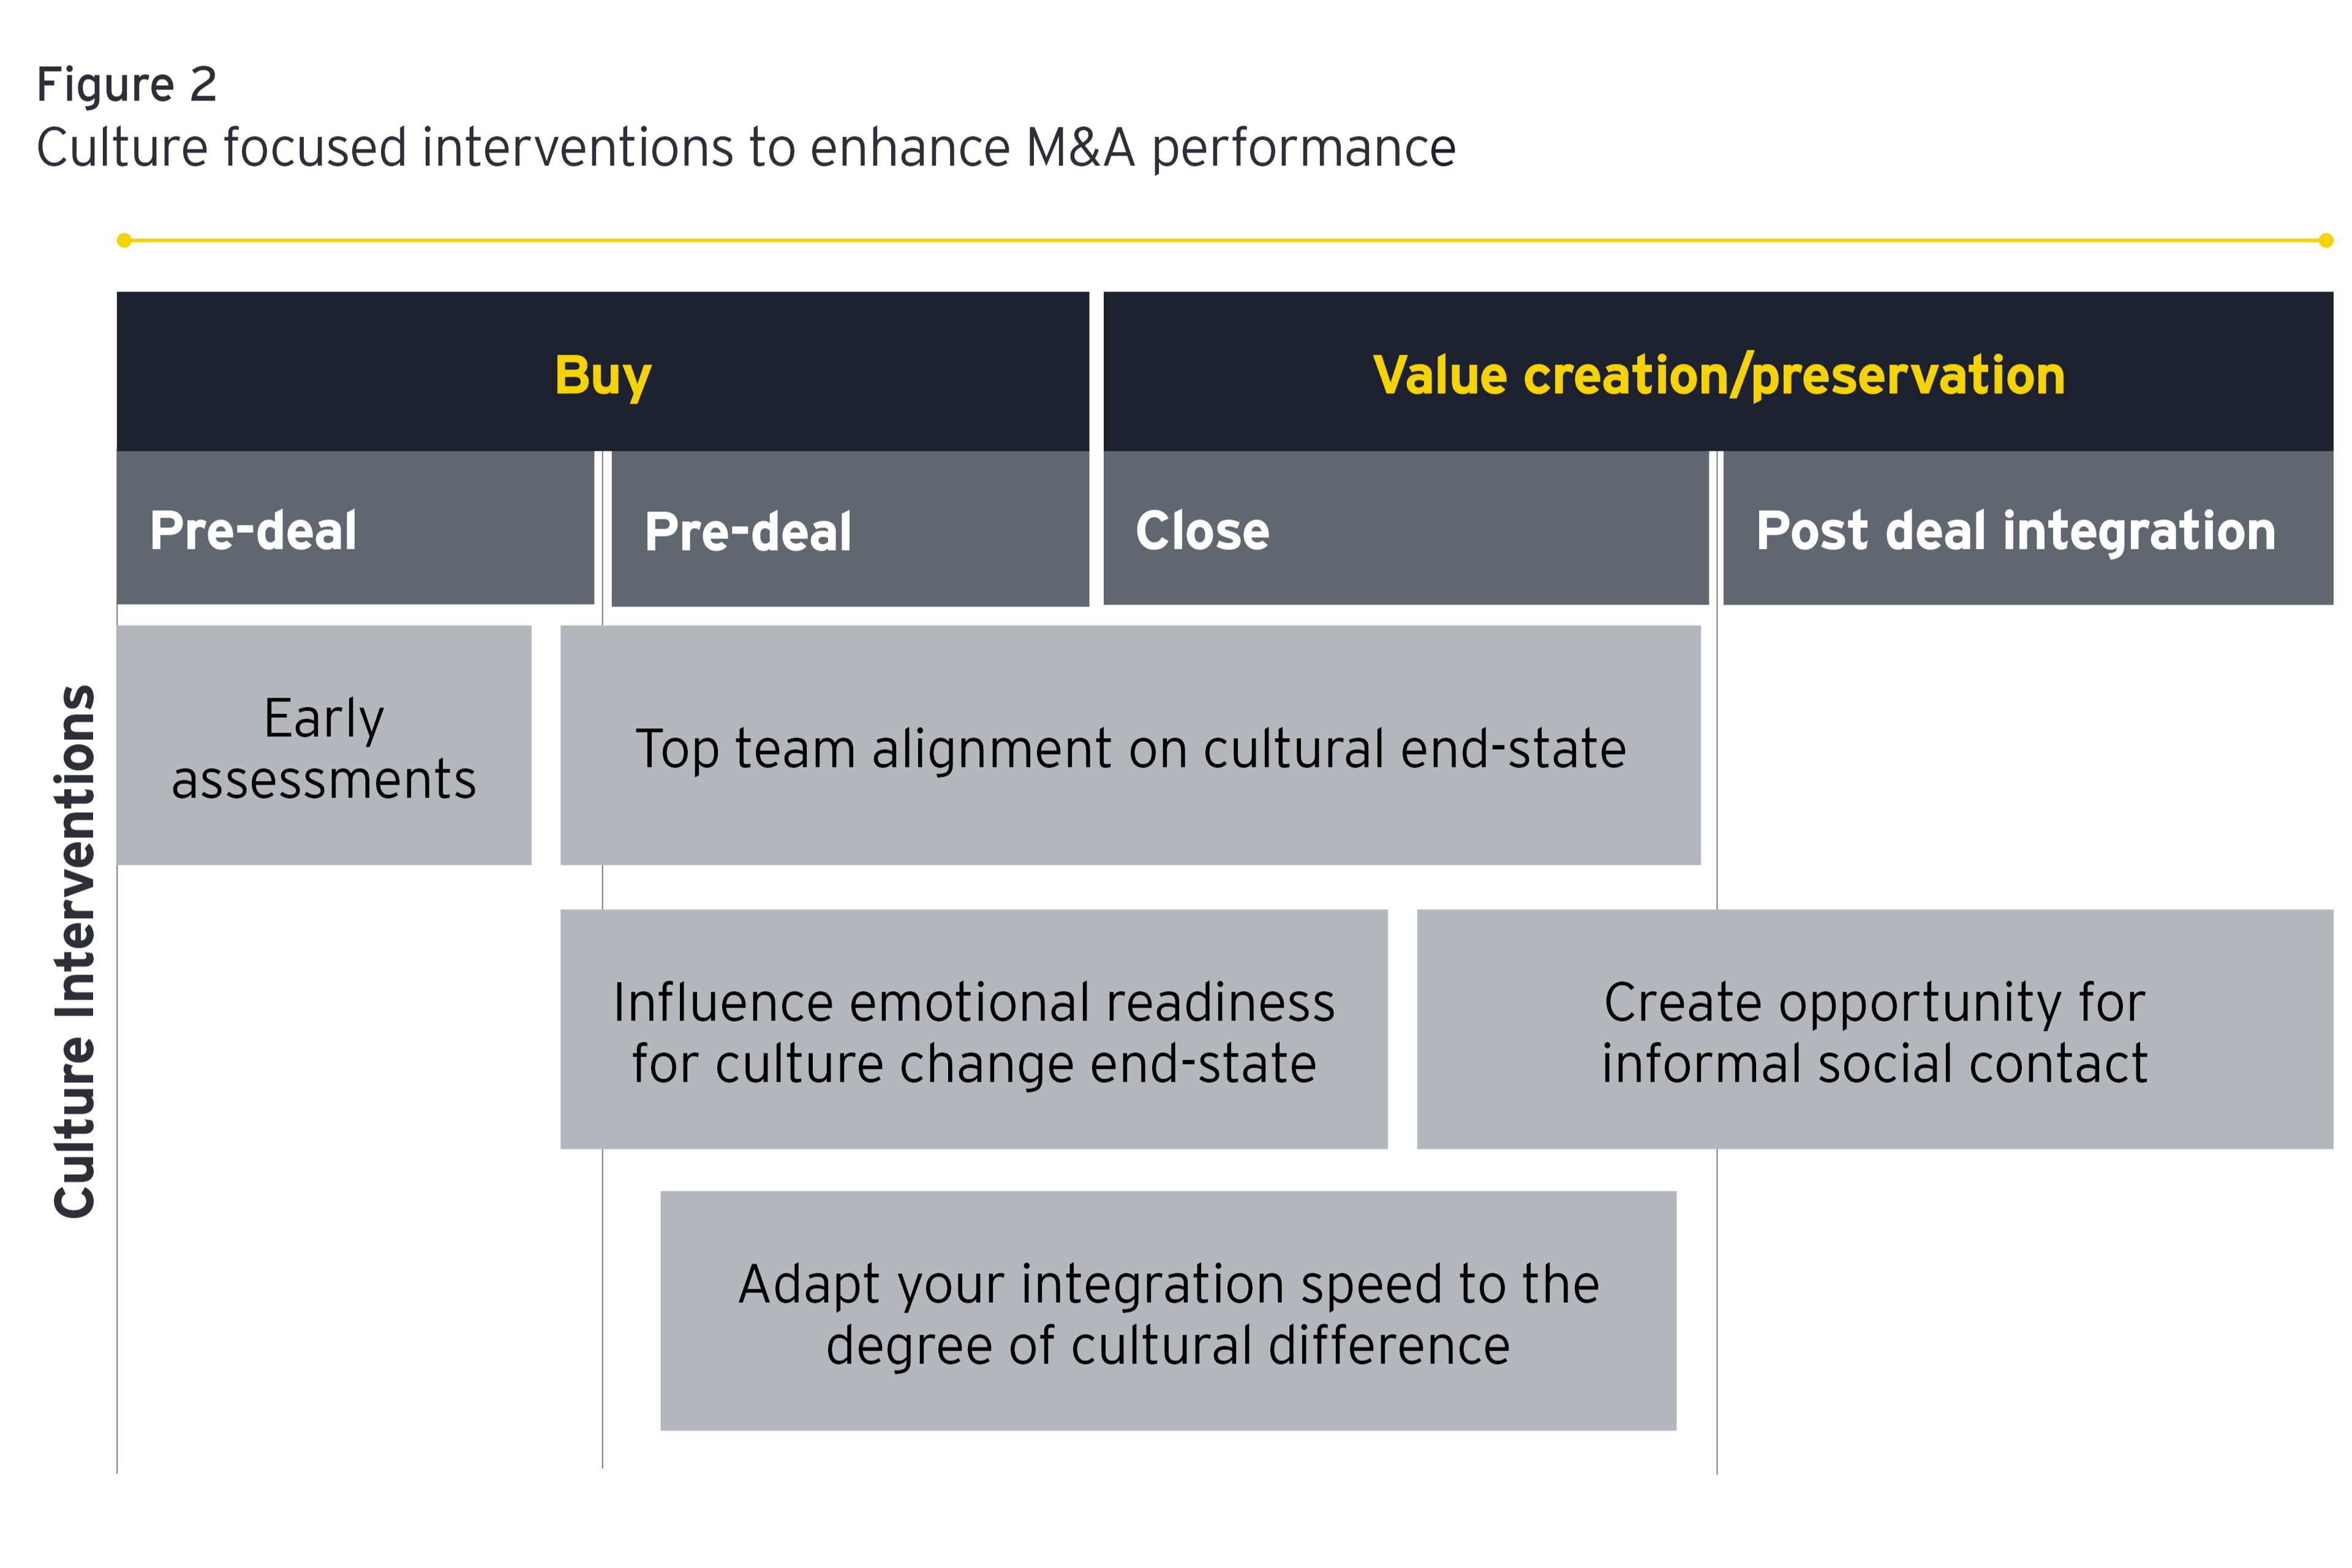 Culture focussed interventions to enhance M&A performance